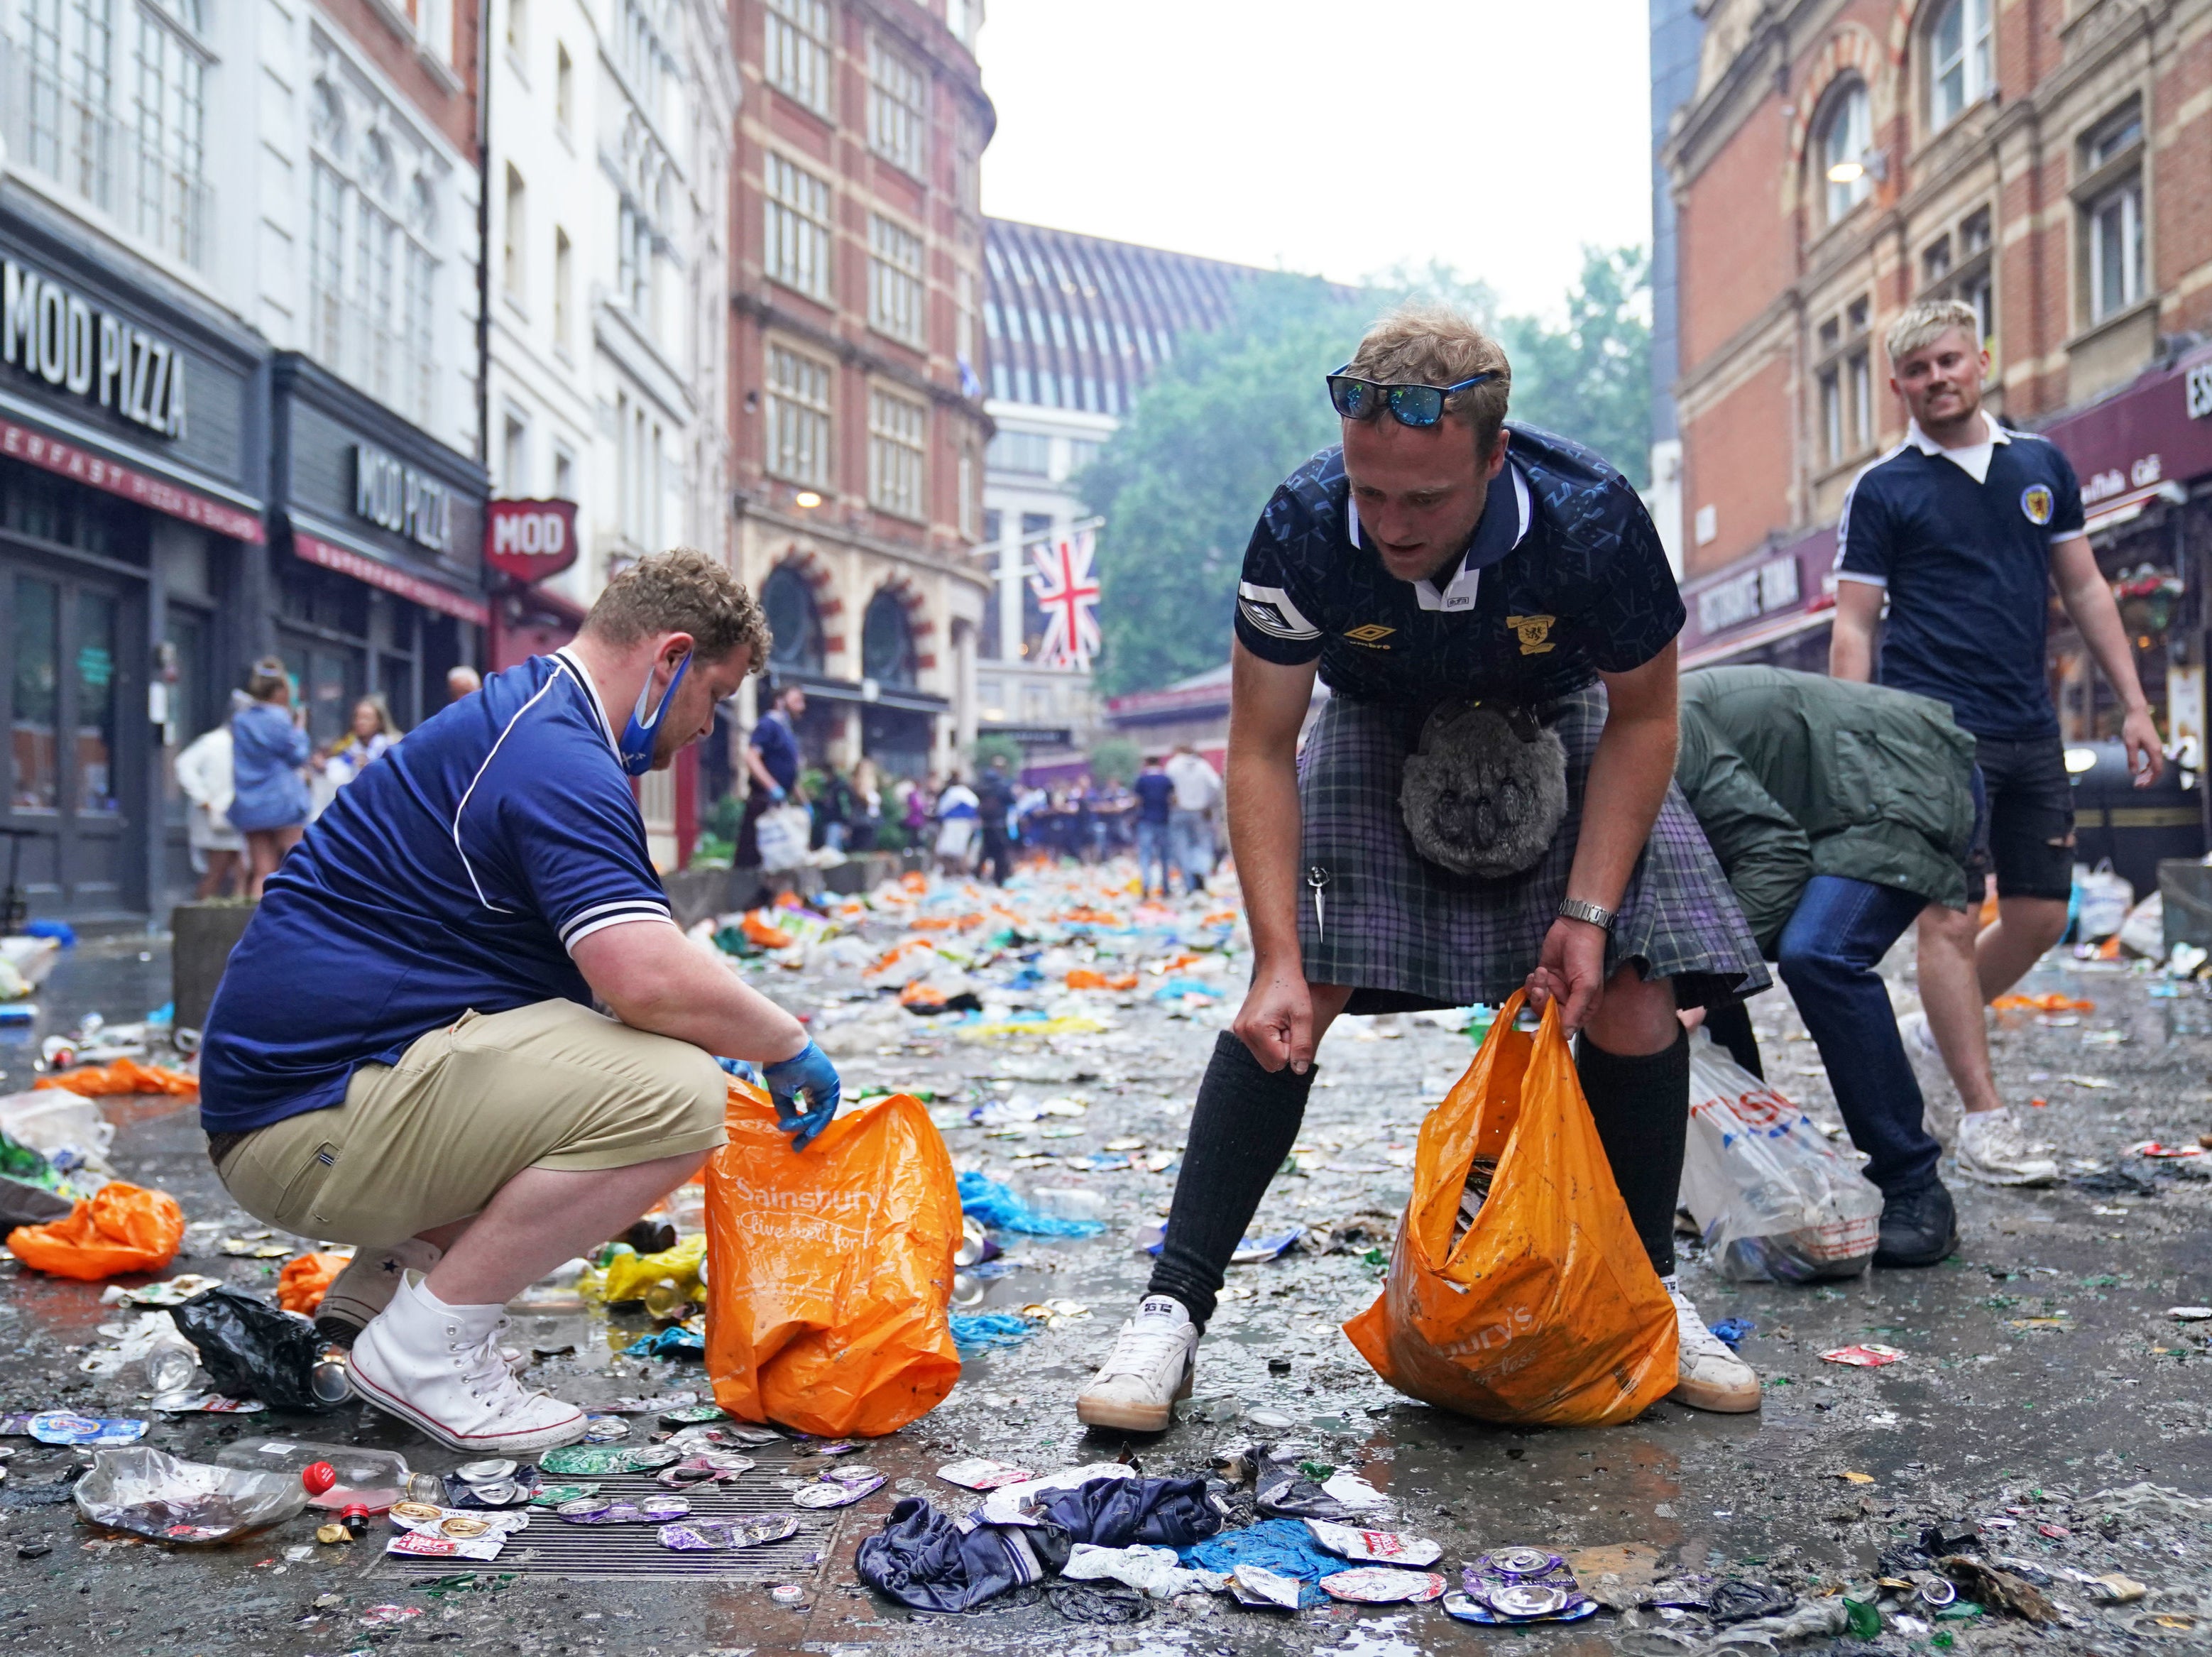 Scotland fans clean up litter in Irving Street near Leicester Square, London.